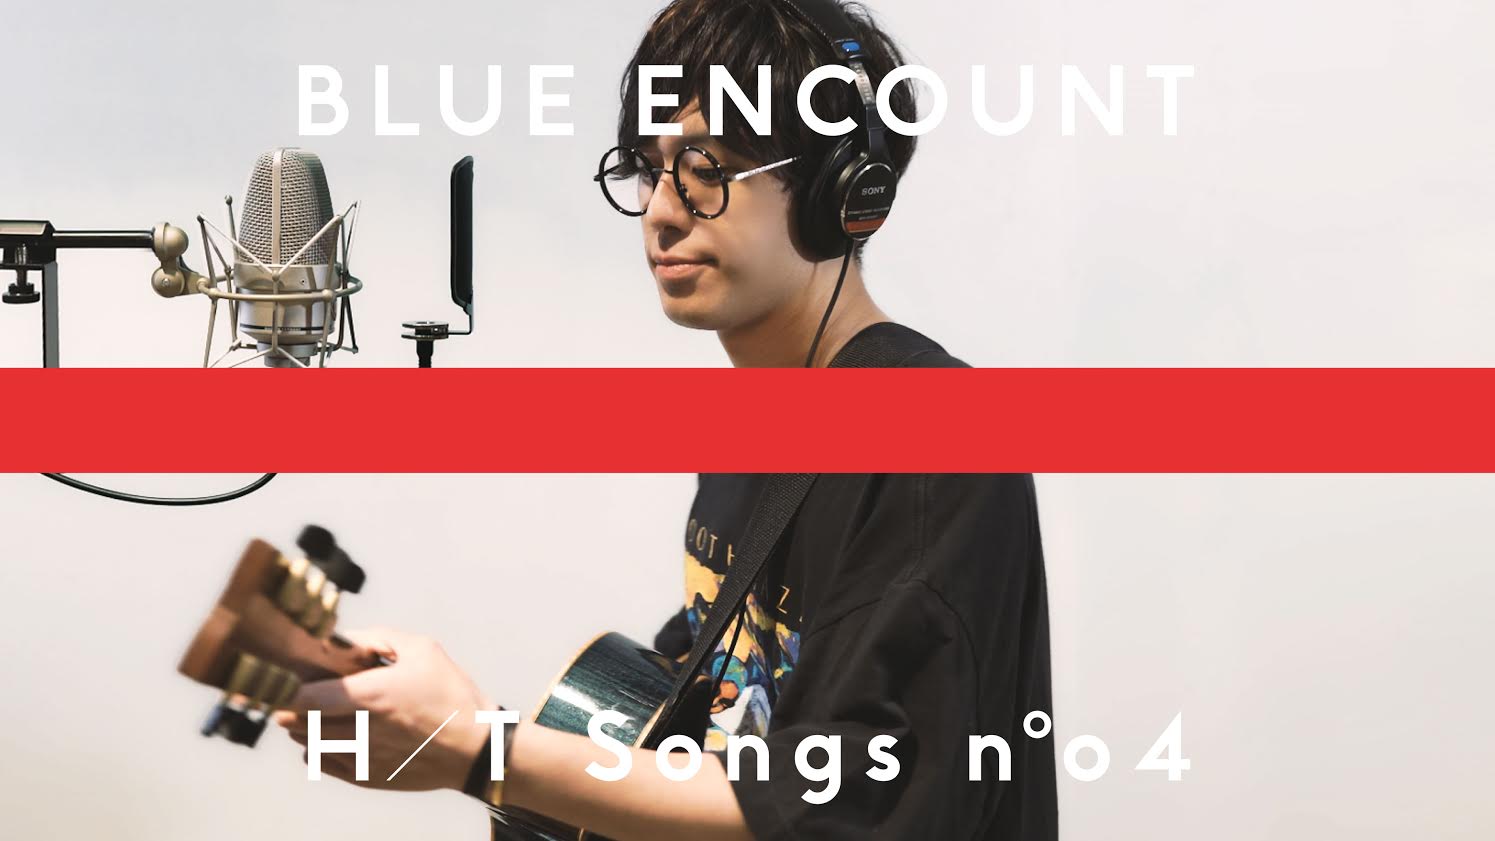 BLUE ENCOUNTのVo.Gr. 田邊駿一が「THE FIRST TAKE」から生まれた新コンテンツ「THE HOME TAKE」第4回に登場サムネイル画像!